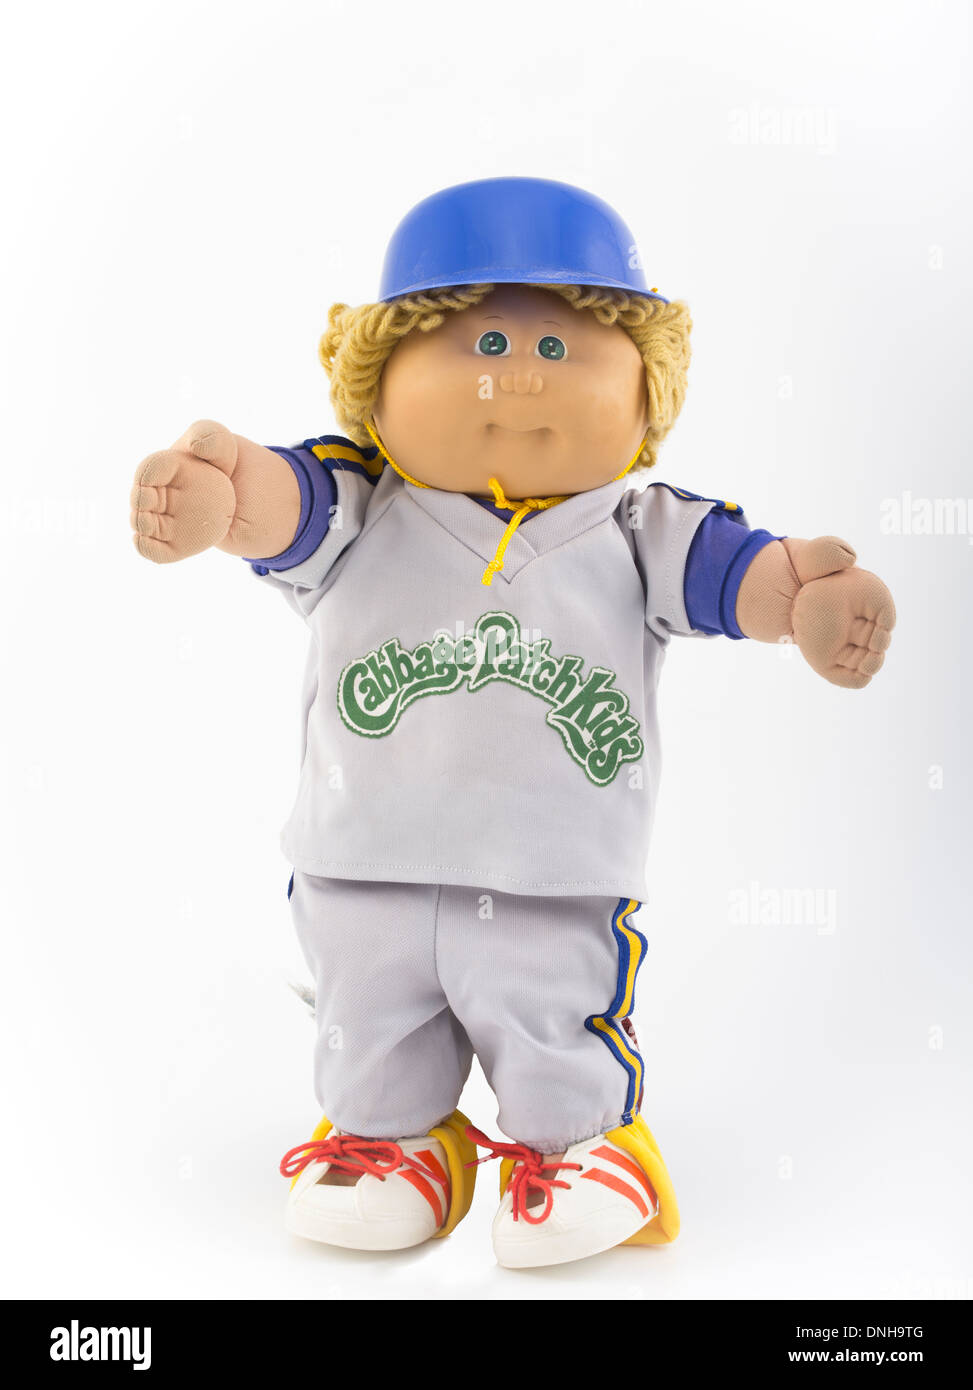 Cabbage Patch Kids Arlo Scotty created by Xavier Roberts 1982 Coleco Iconic toy of the 80's 80s Stock Photo